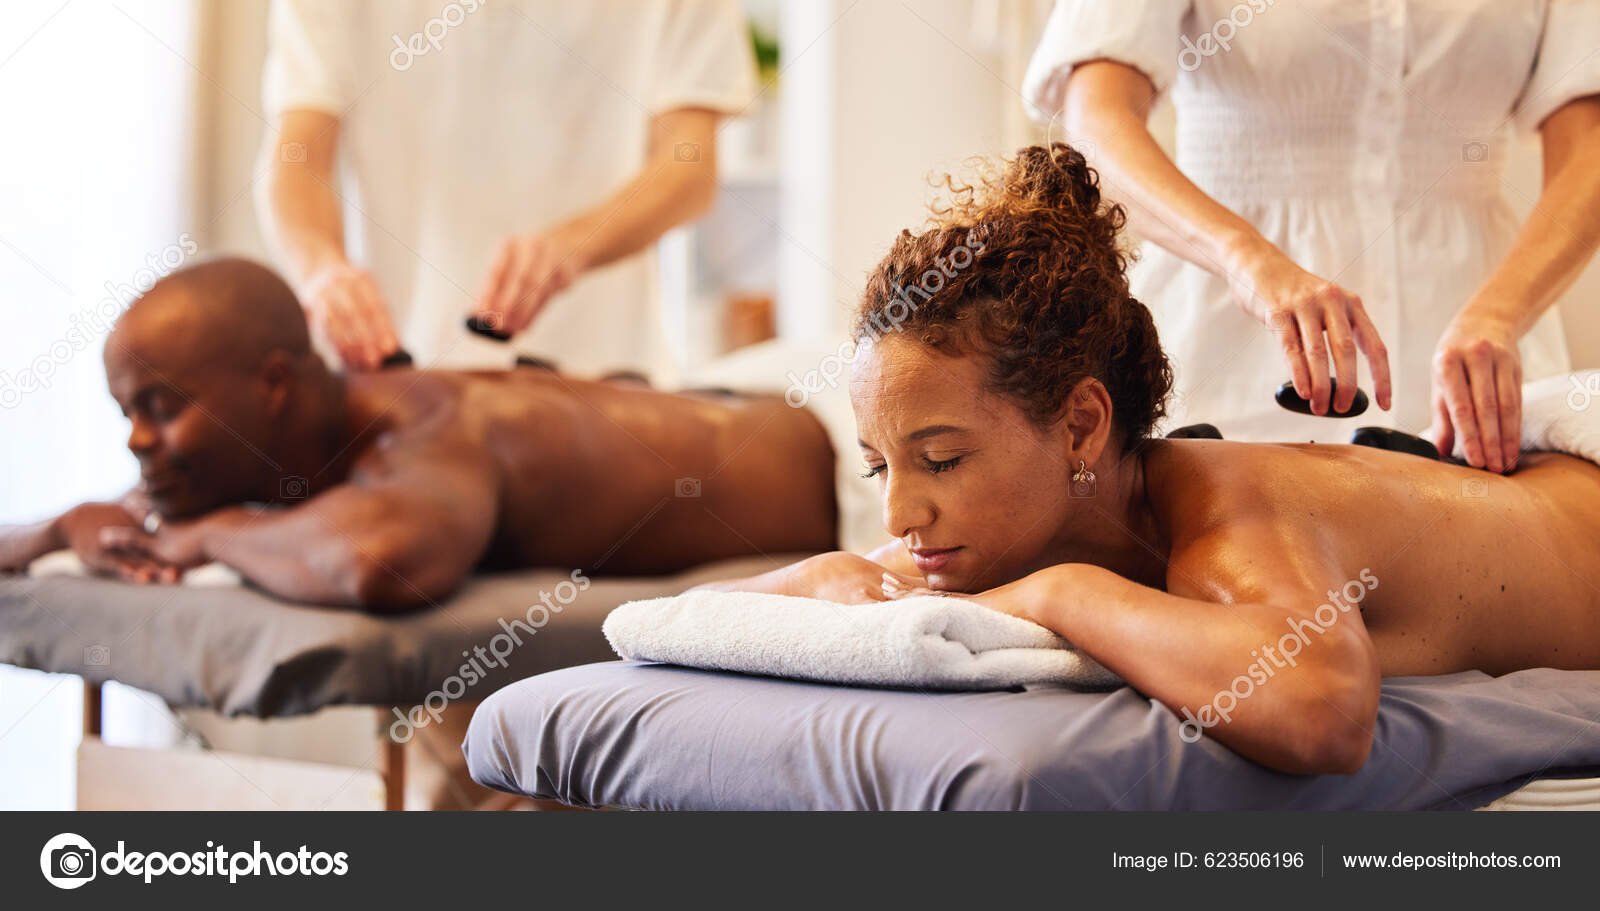 Beauty Spa Background Massage Bed And Luxury Wellness For Zen Therapy  Skincare And Relax Body Towels For Calm Peaceful And Holistic Break To  Enjoy Rest Retreat And Stress Free Weekend At Resort